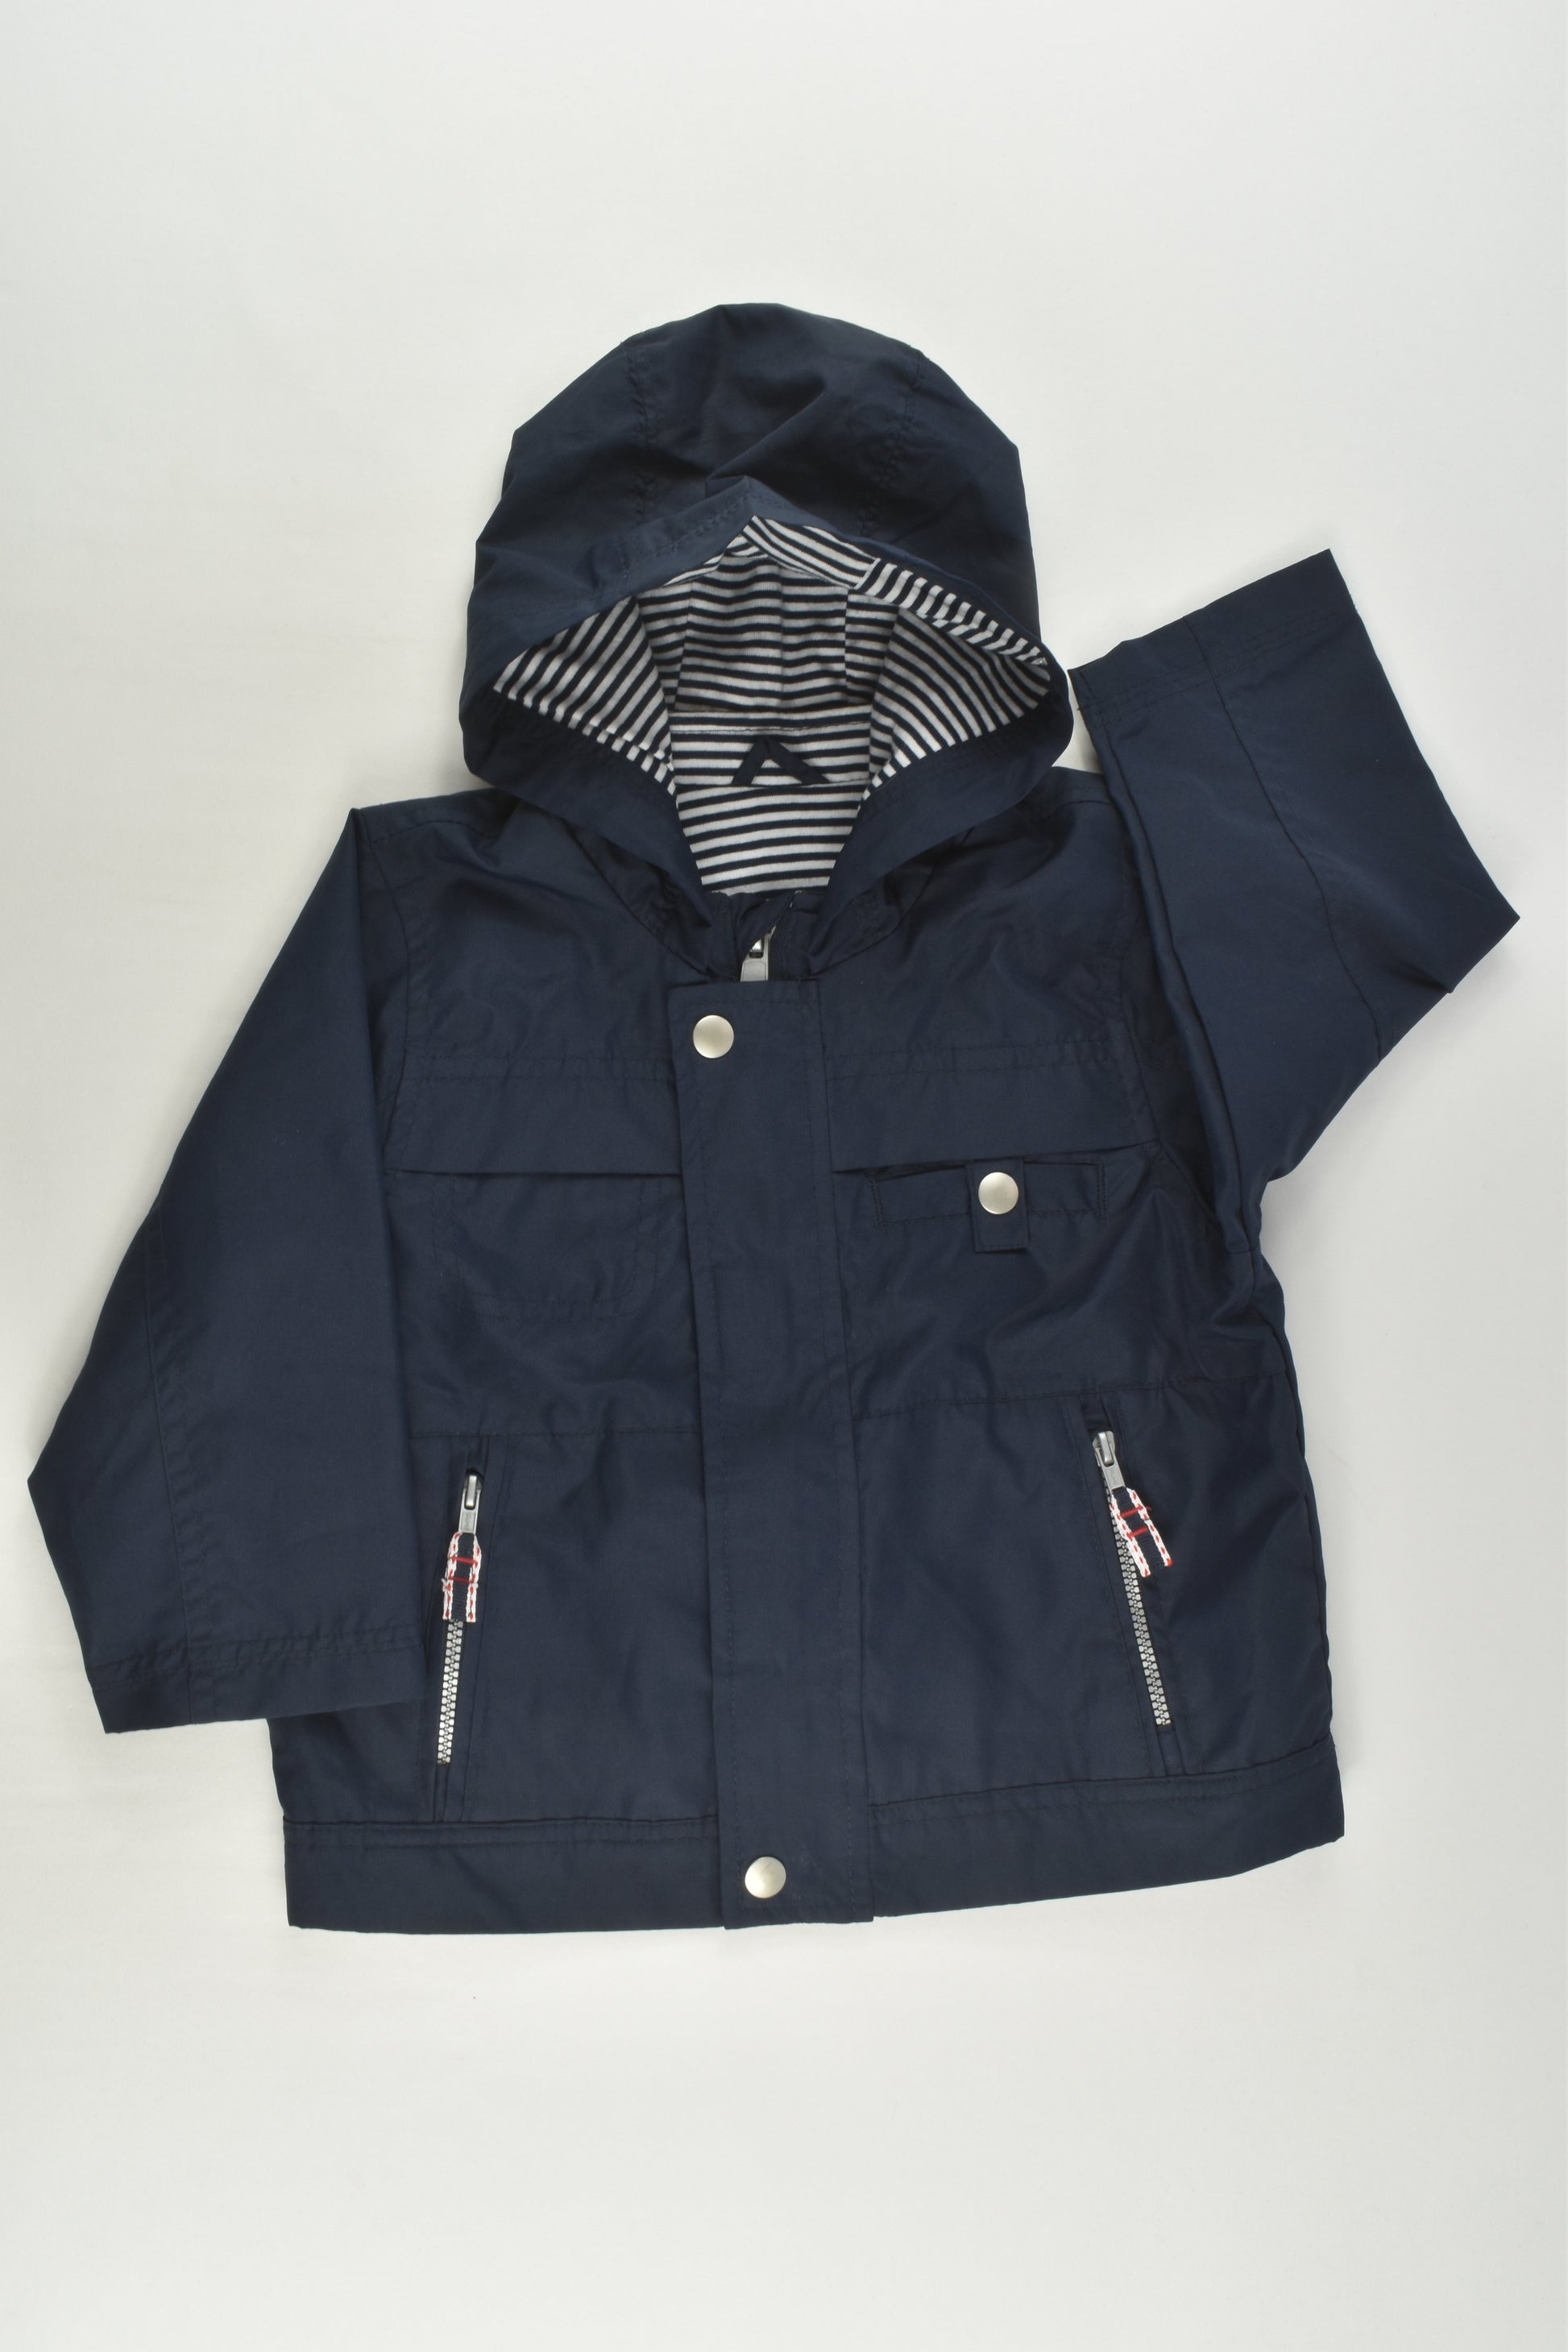 Mothercare Size 0 (9-12 months) Water Repellent Jacket